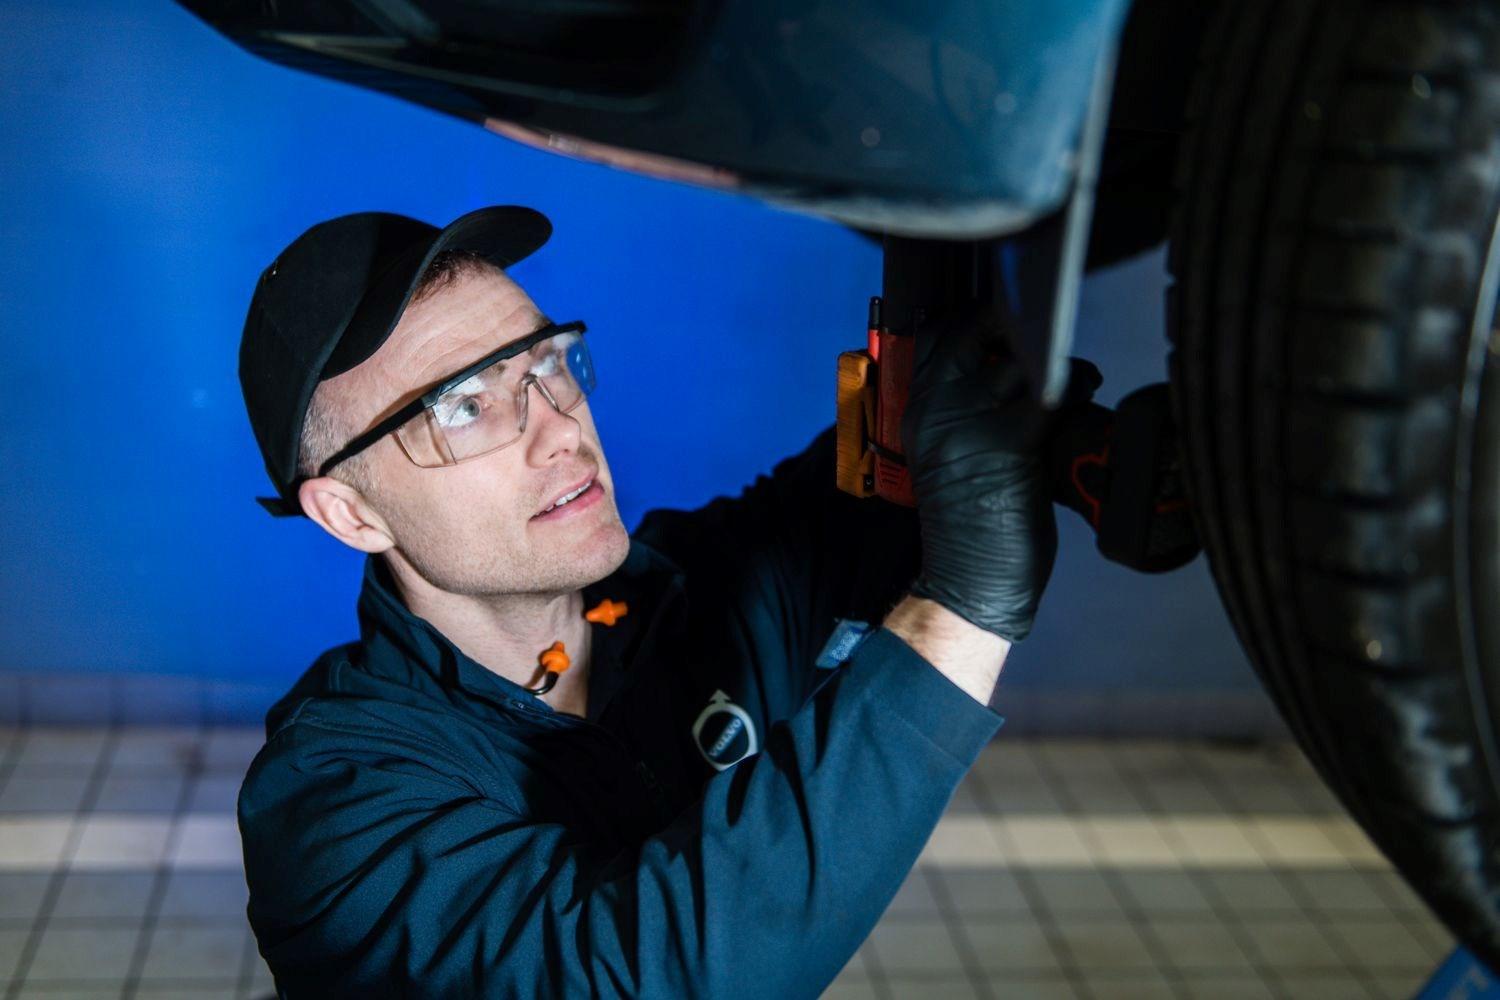 Agnew Belfast Volvo engineer inspects used car with handheld light for damage to repair during Free Volvo Repair